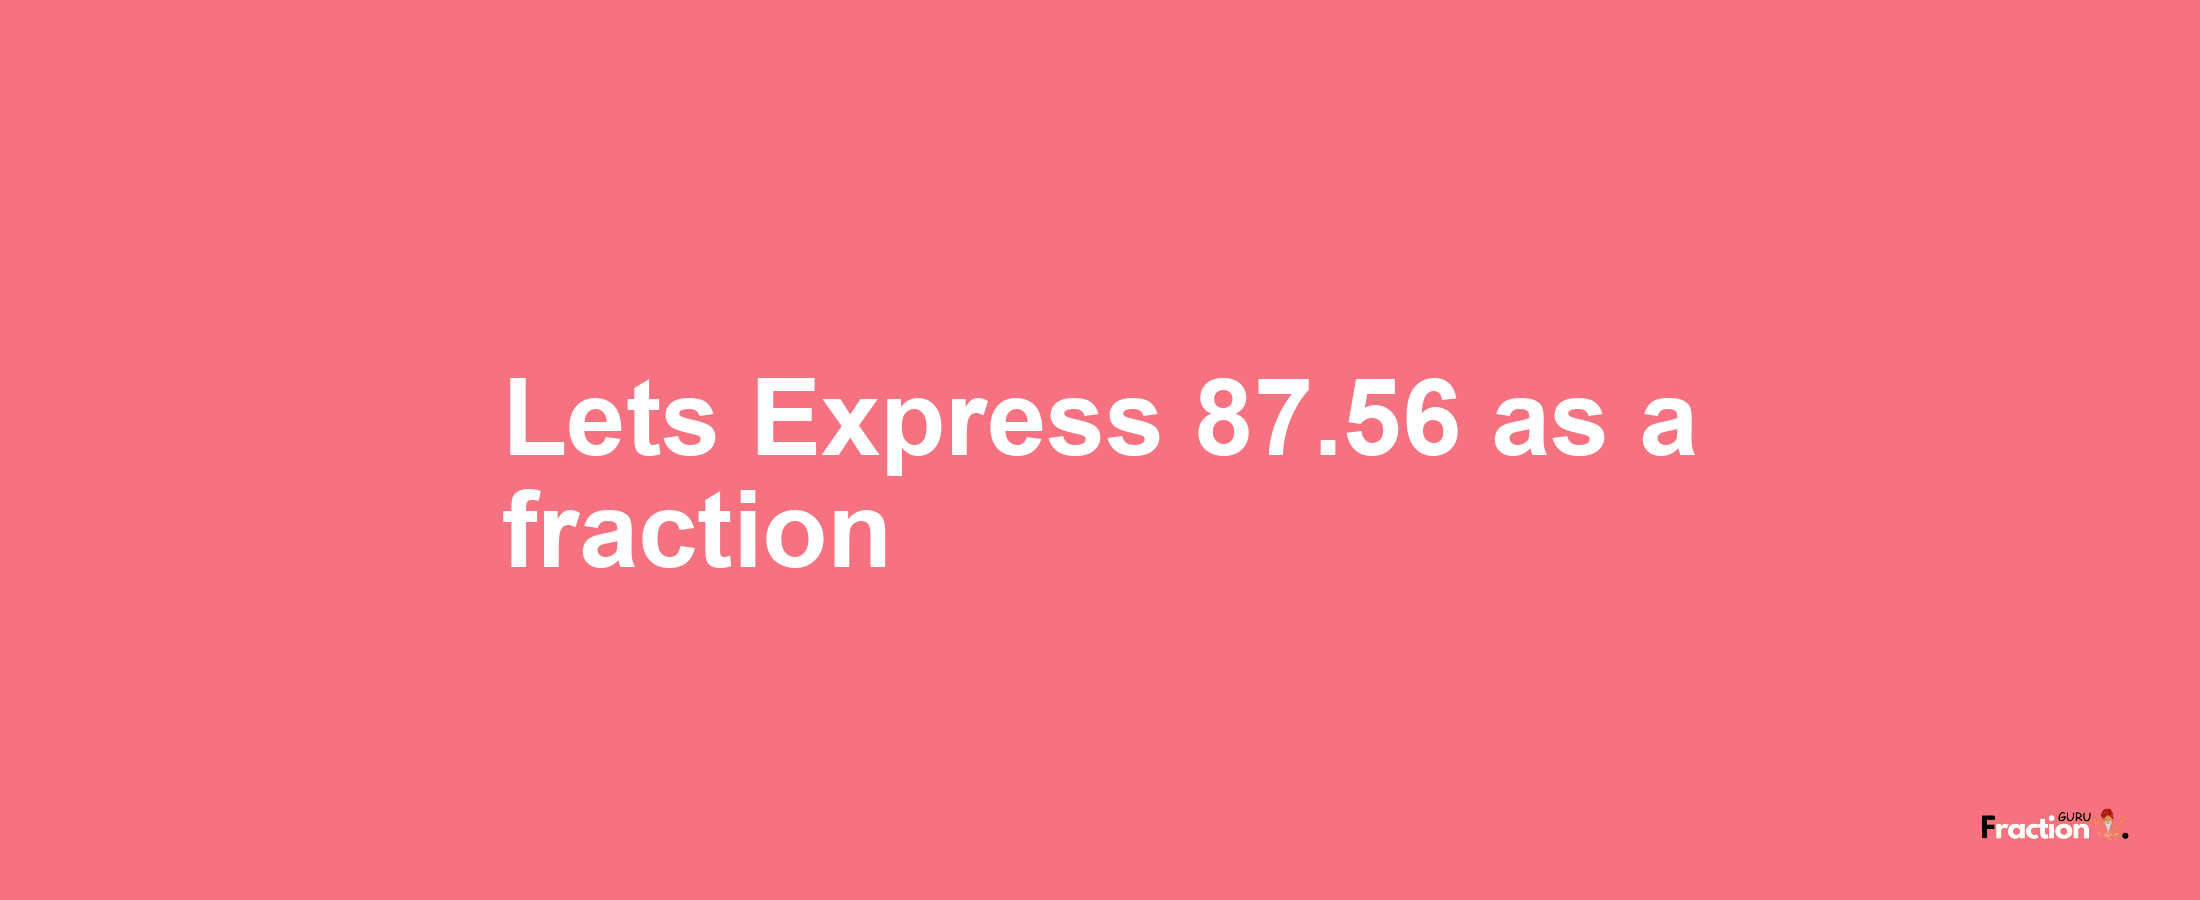 Lets Express 87.56 as afraction